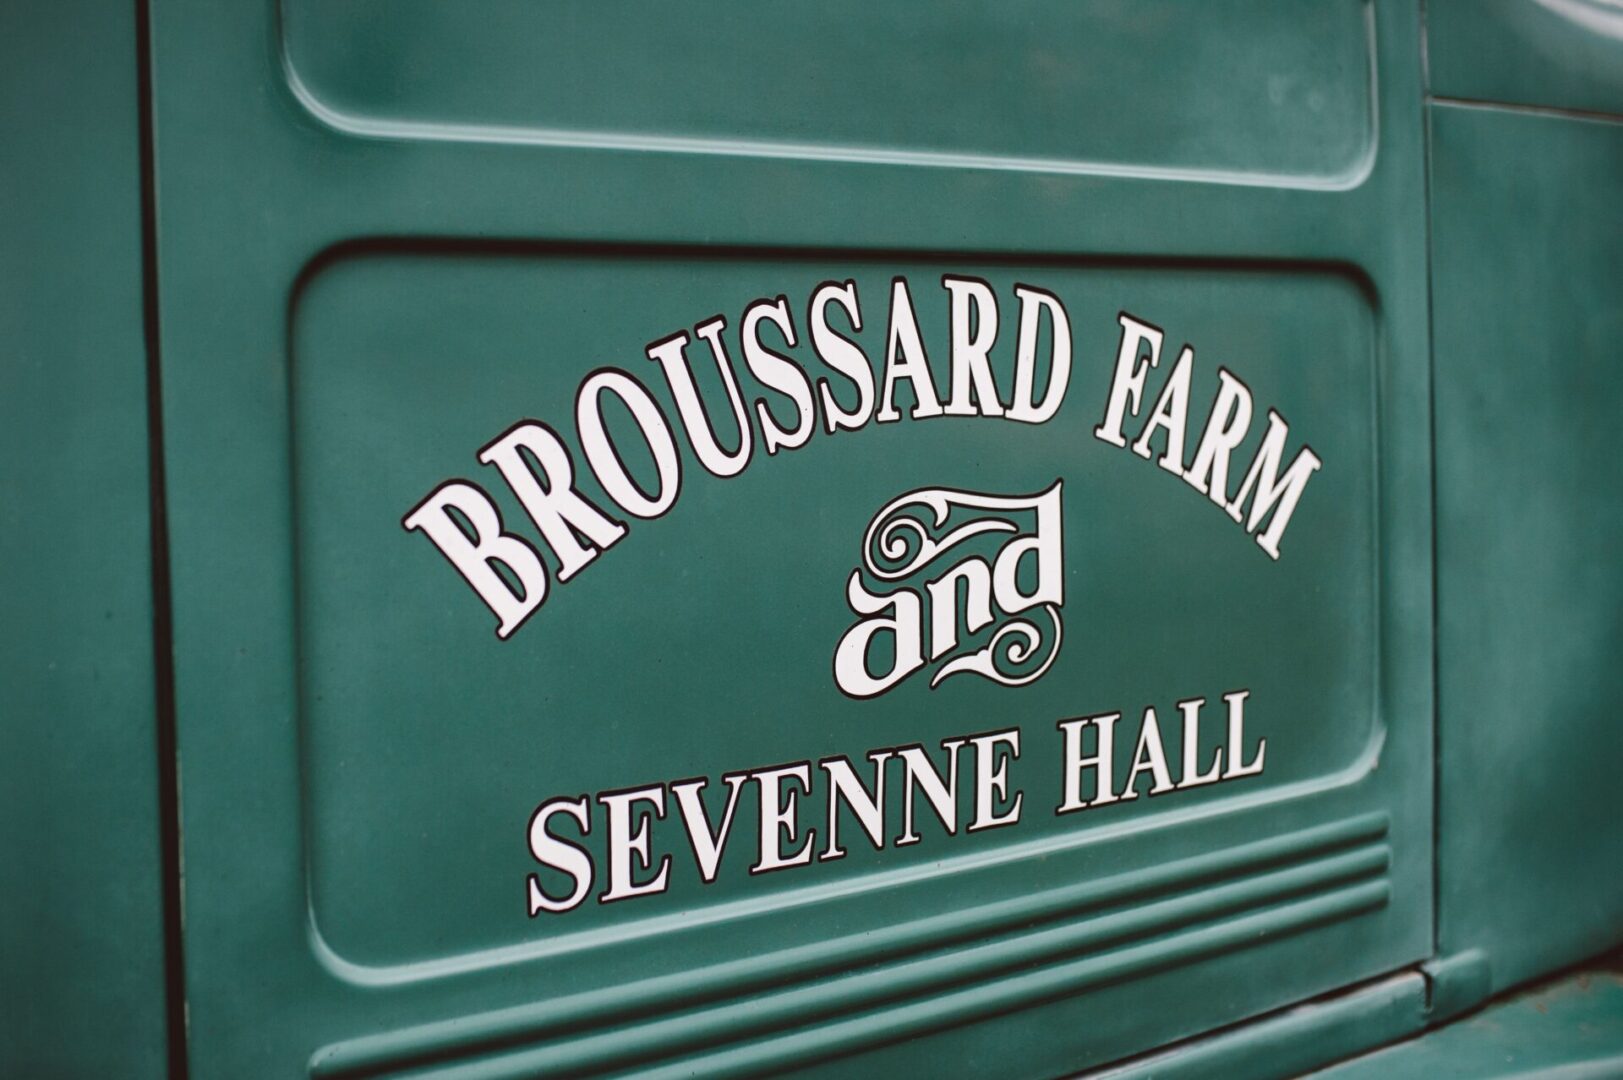 Broussard farm and sevenne hall sign green